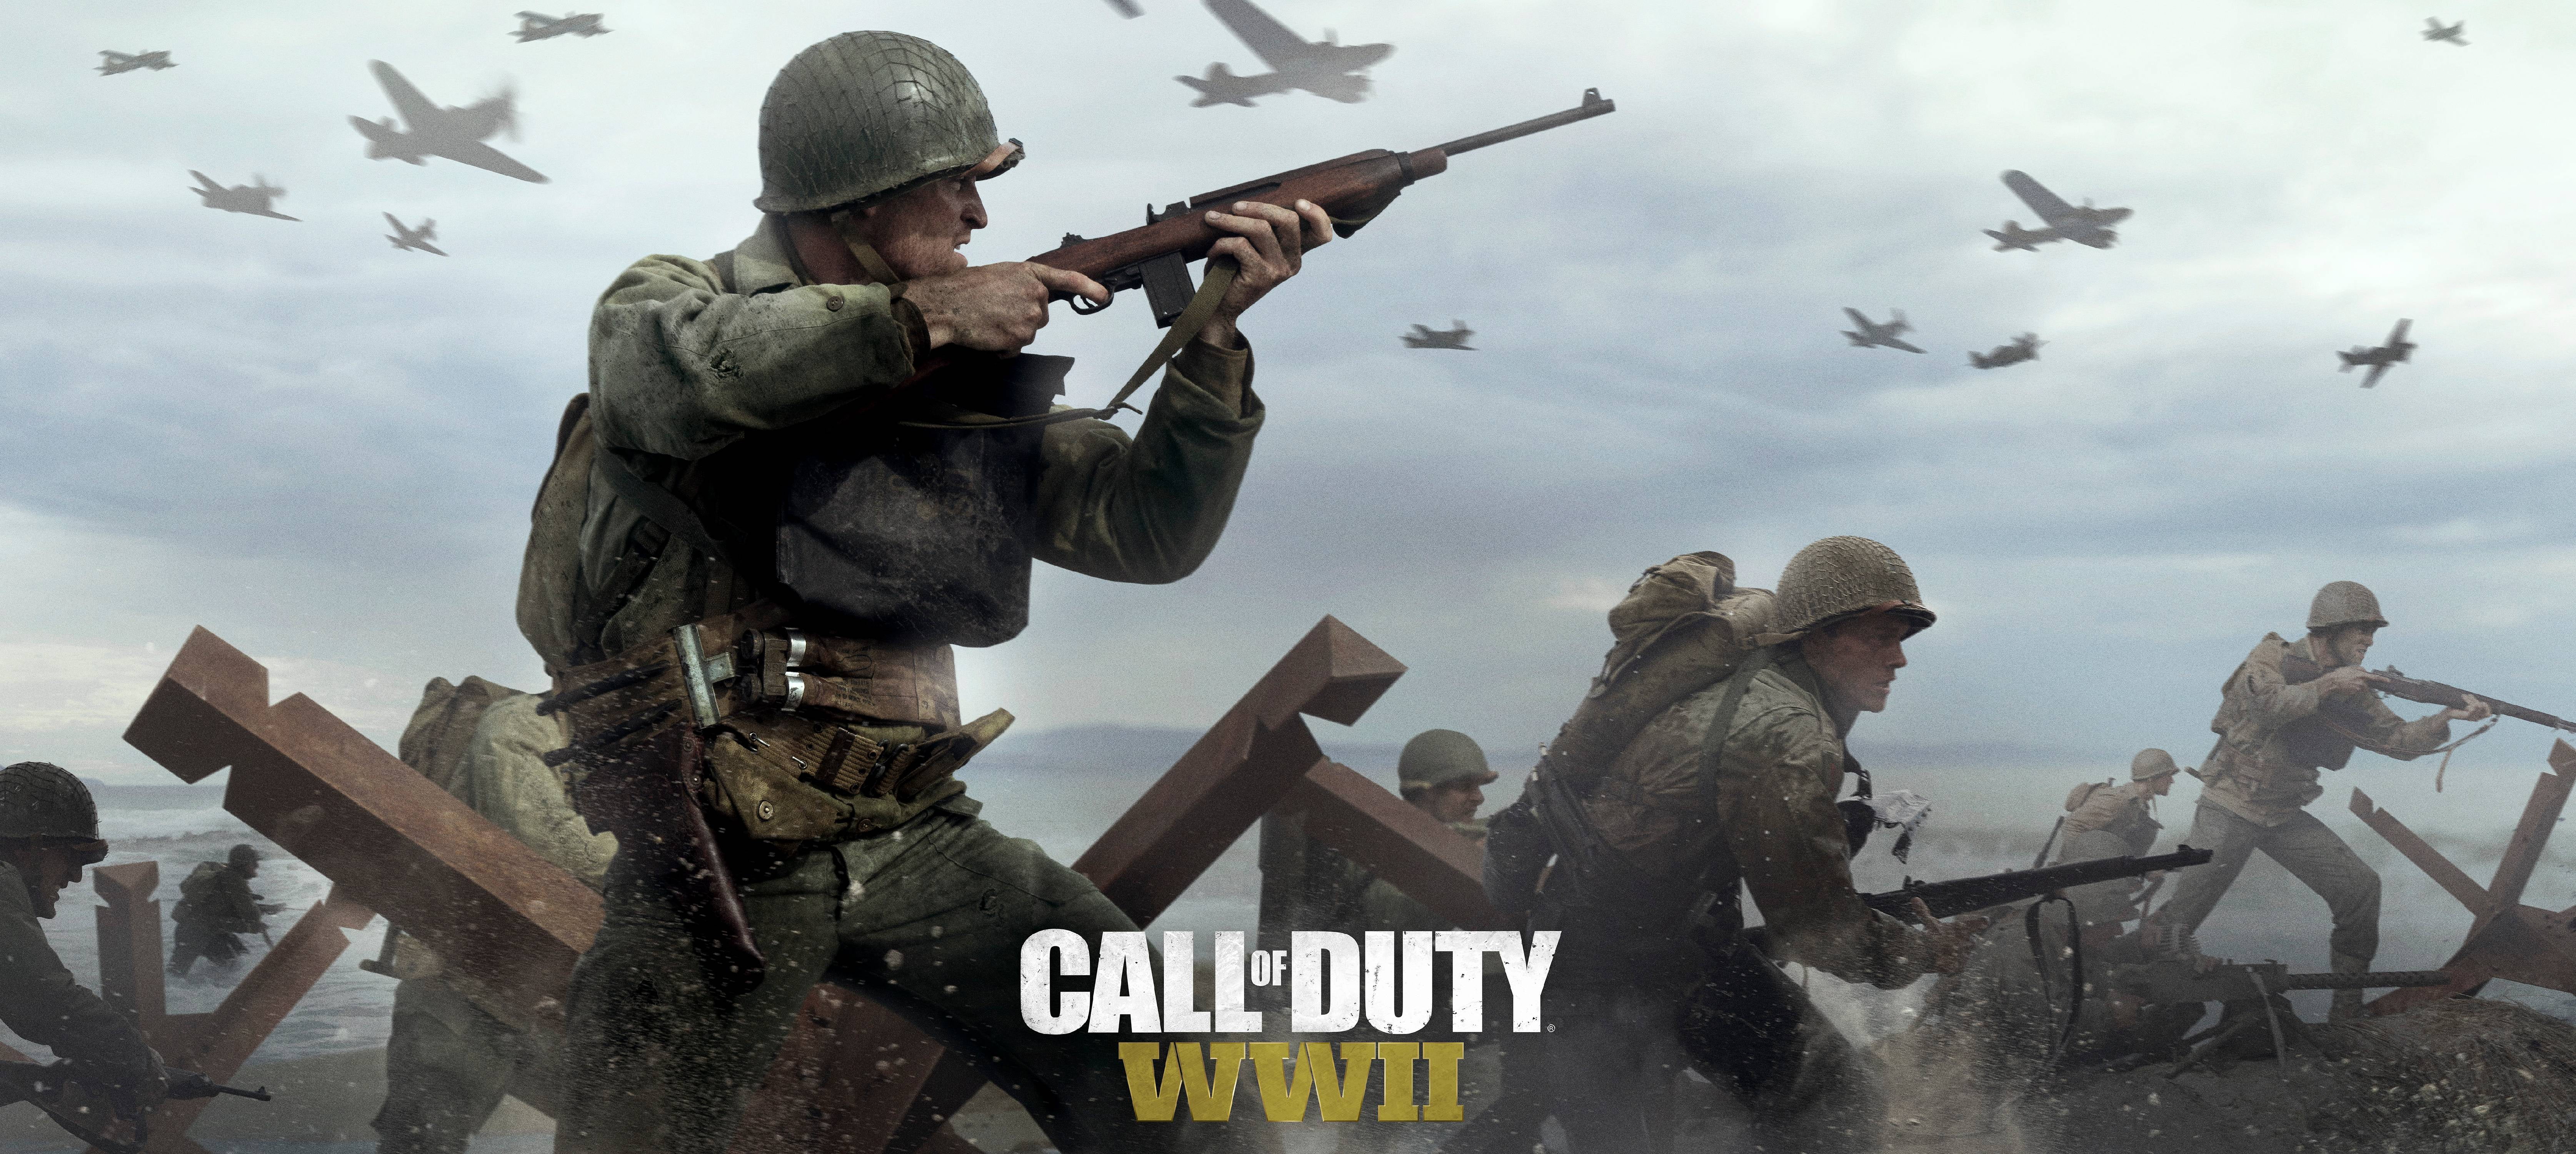 Call of Duty: WWII Games